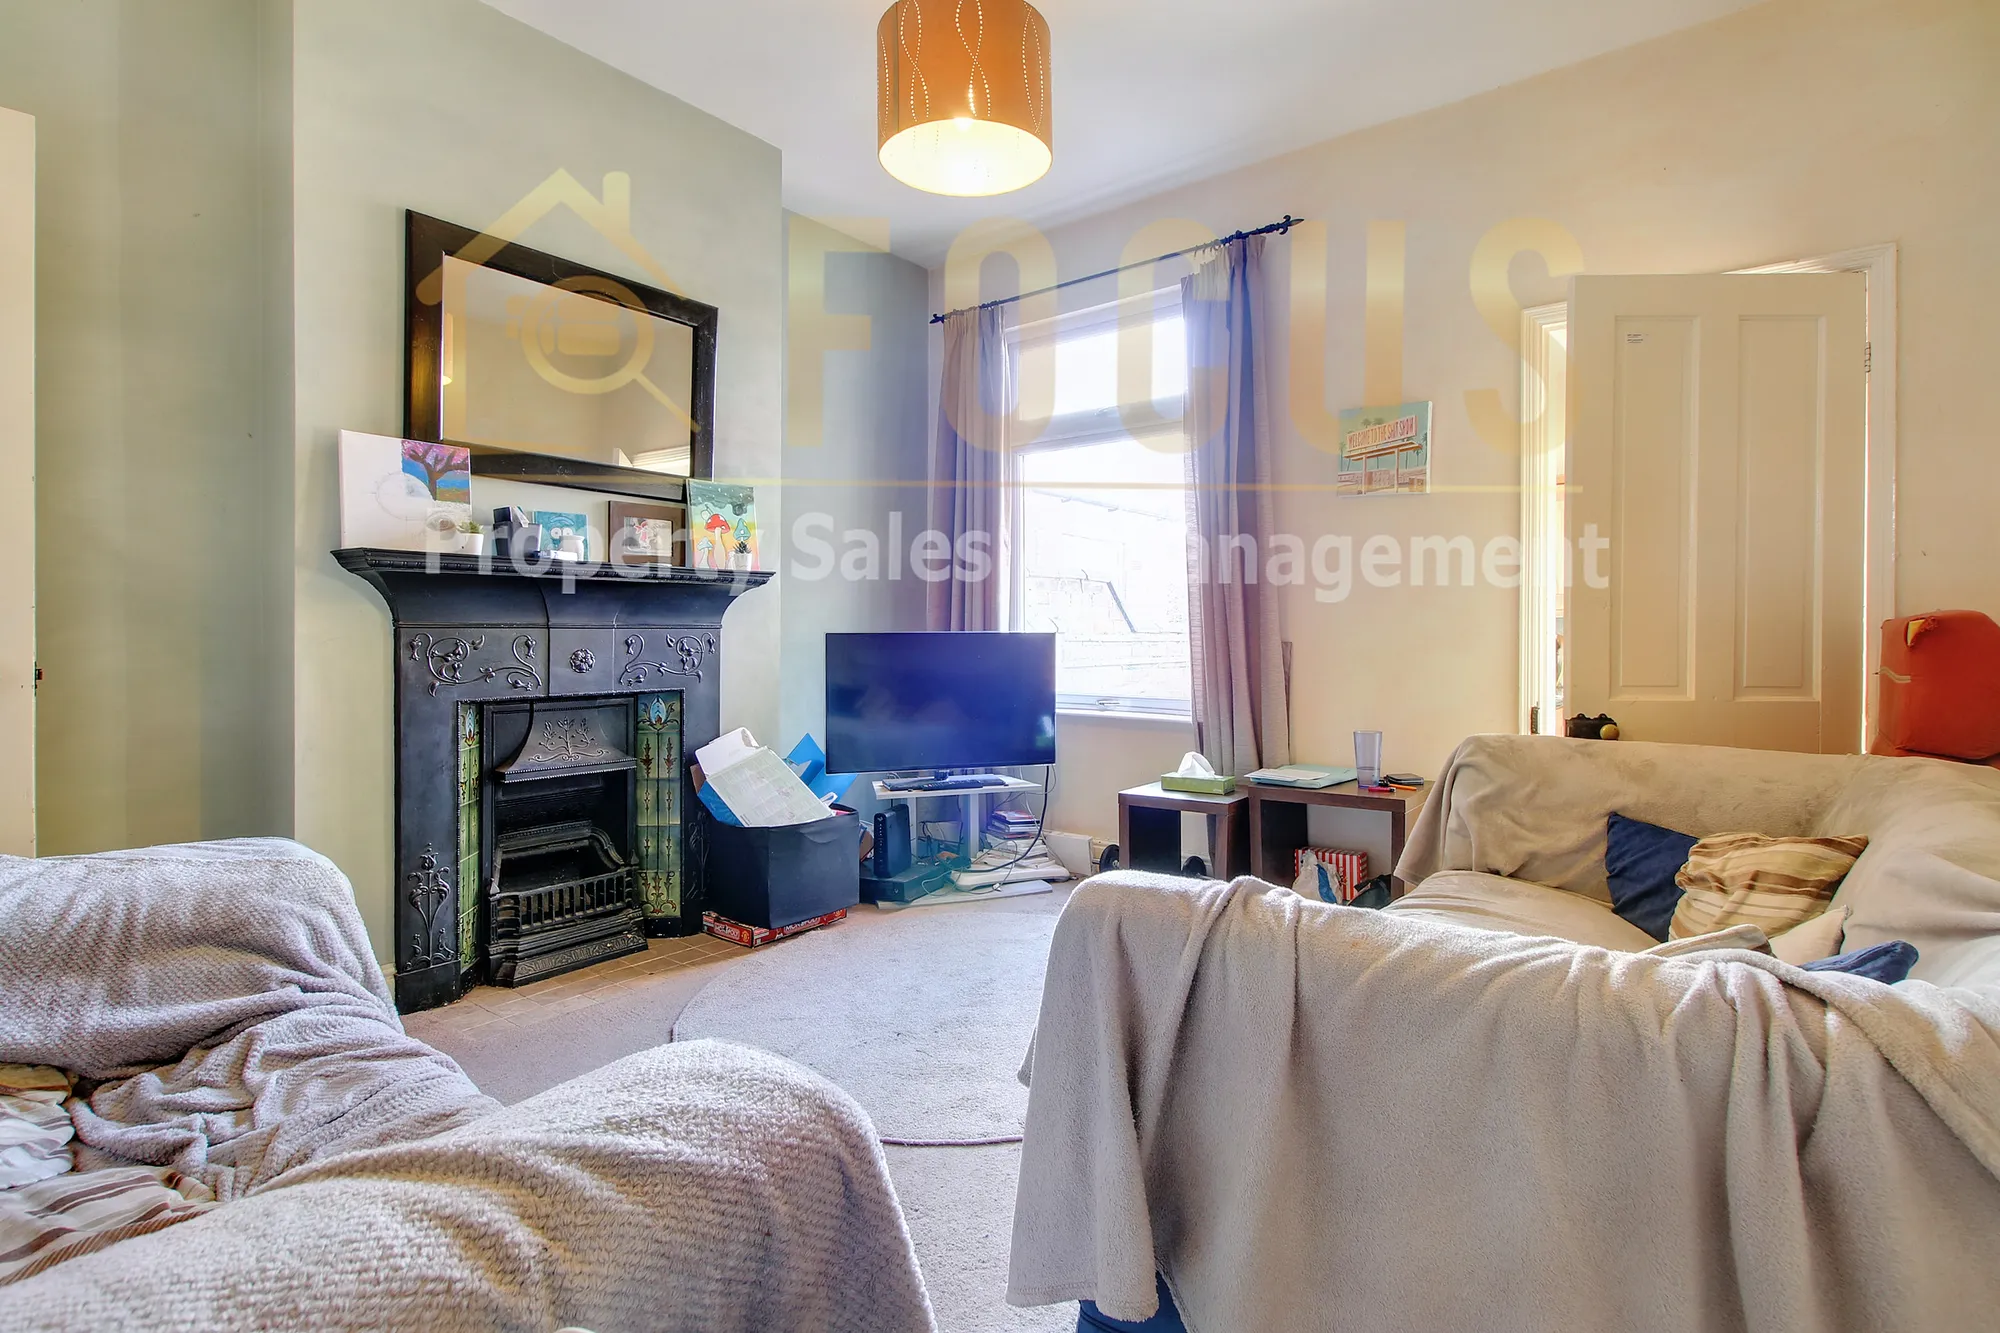 3 bed terraced house to rent in Leopold Road, Leicester - Property Image 1